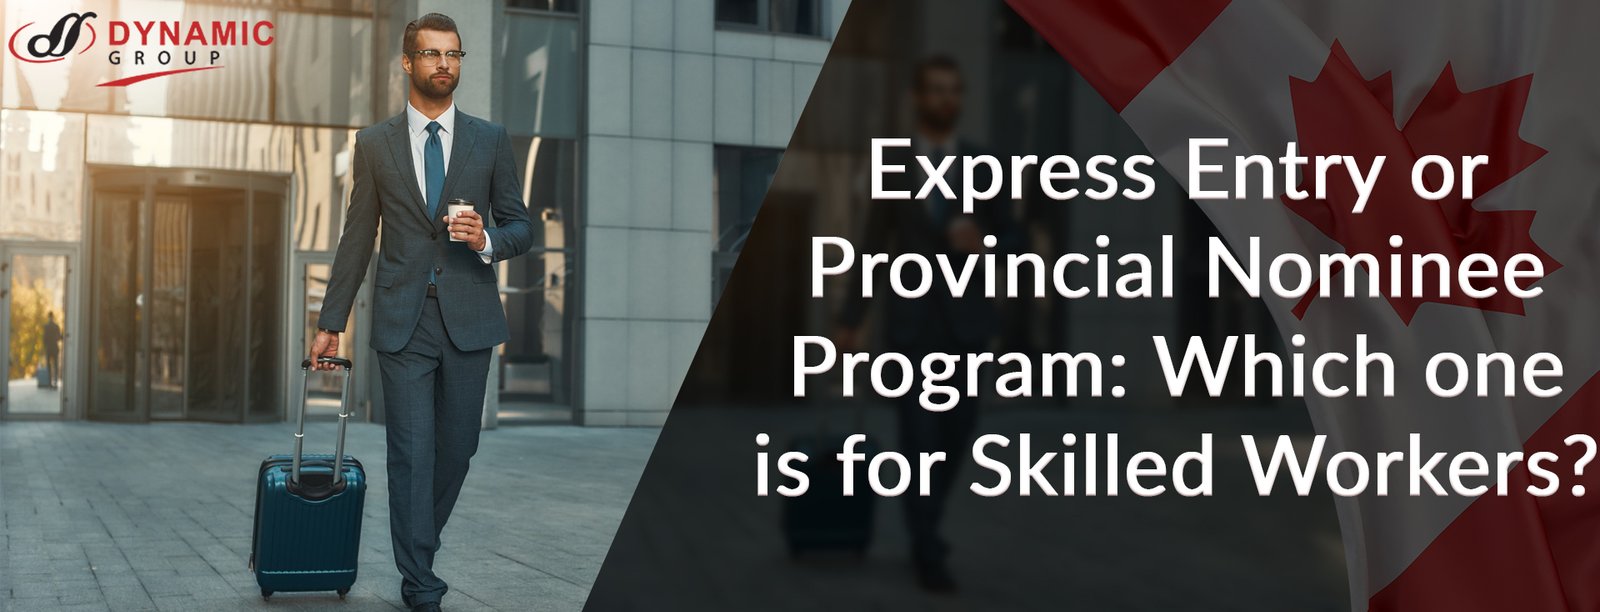 Express Entry or Provincial Nominee Program: Which one is for Skilled Workers?